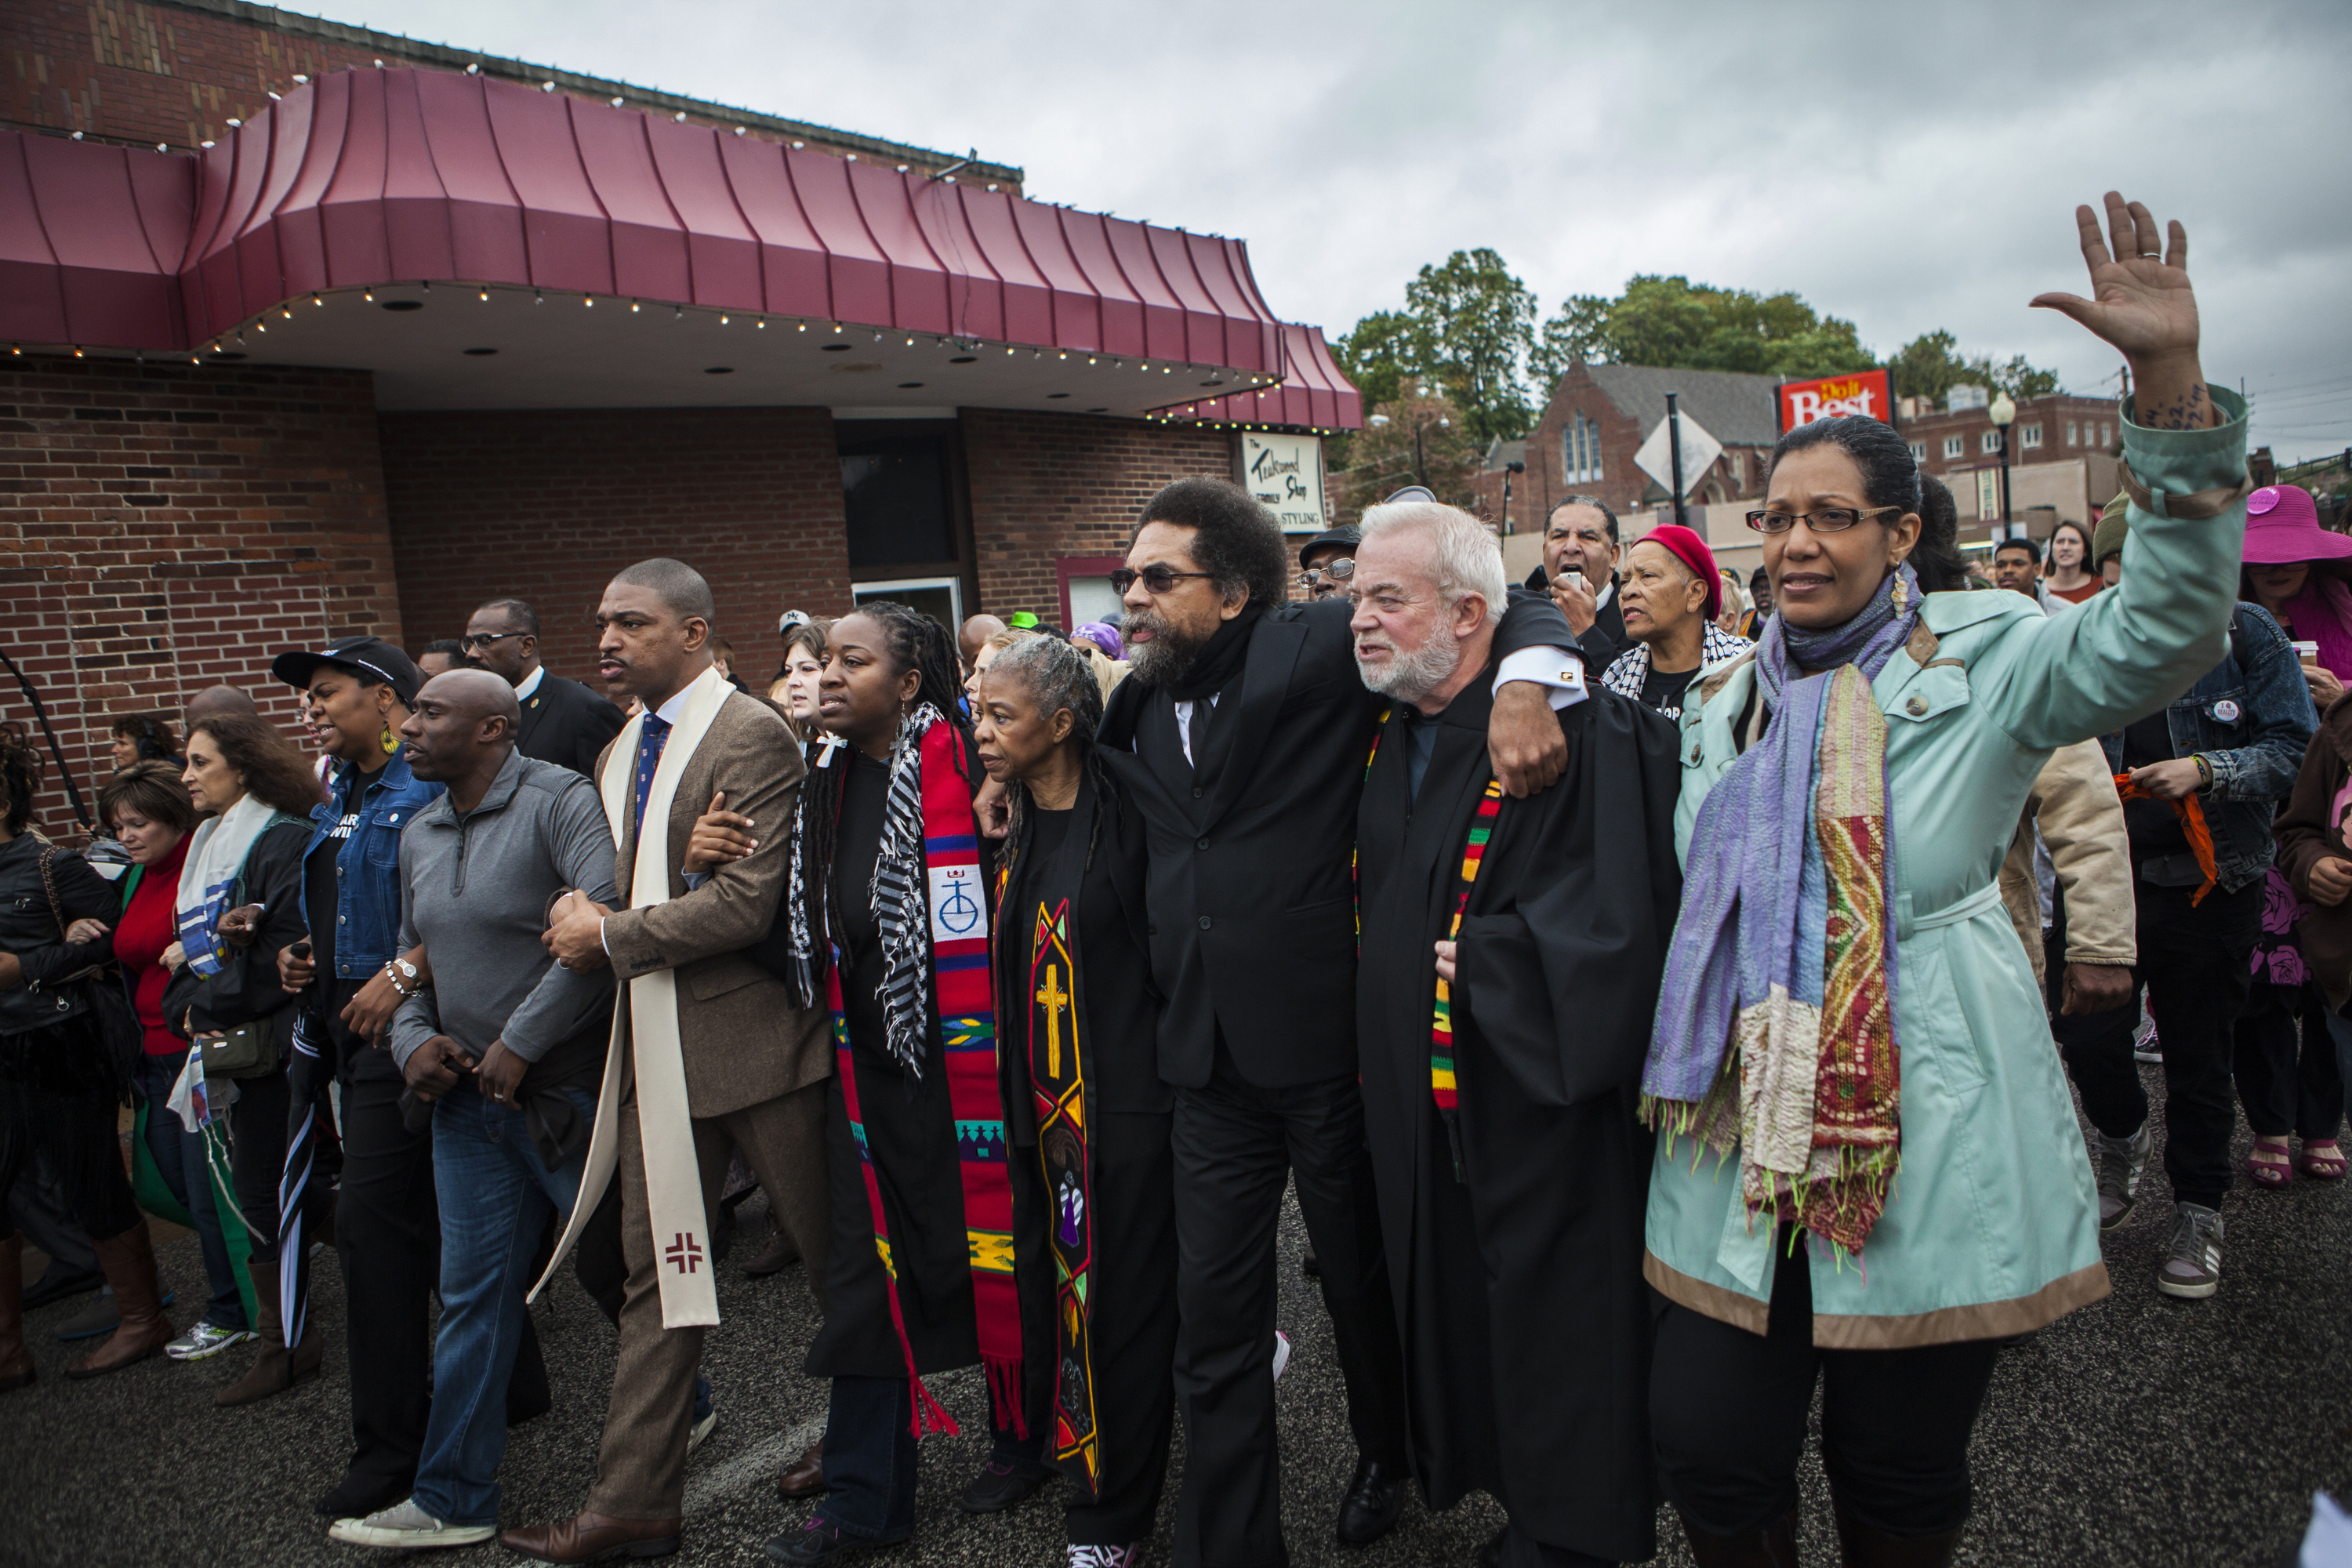 Clergy members lead hundreds of protestors march from Wellspring Church to the Ferguson police station in an act of civil disobedience on October 13, 2014 in Ferguson, Missouri. (Anadolu Agency—Getty Images)